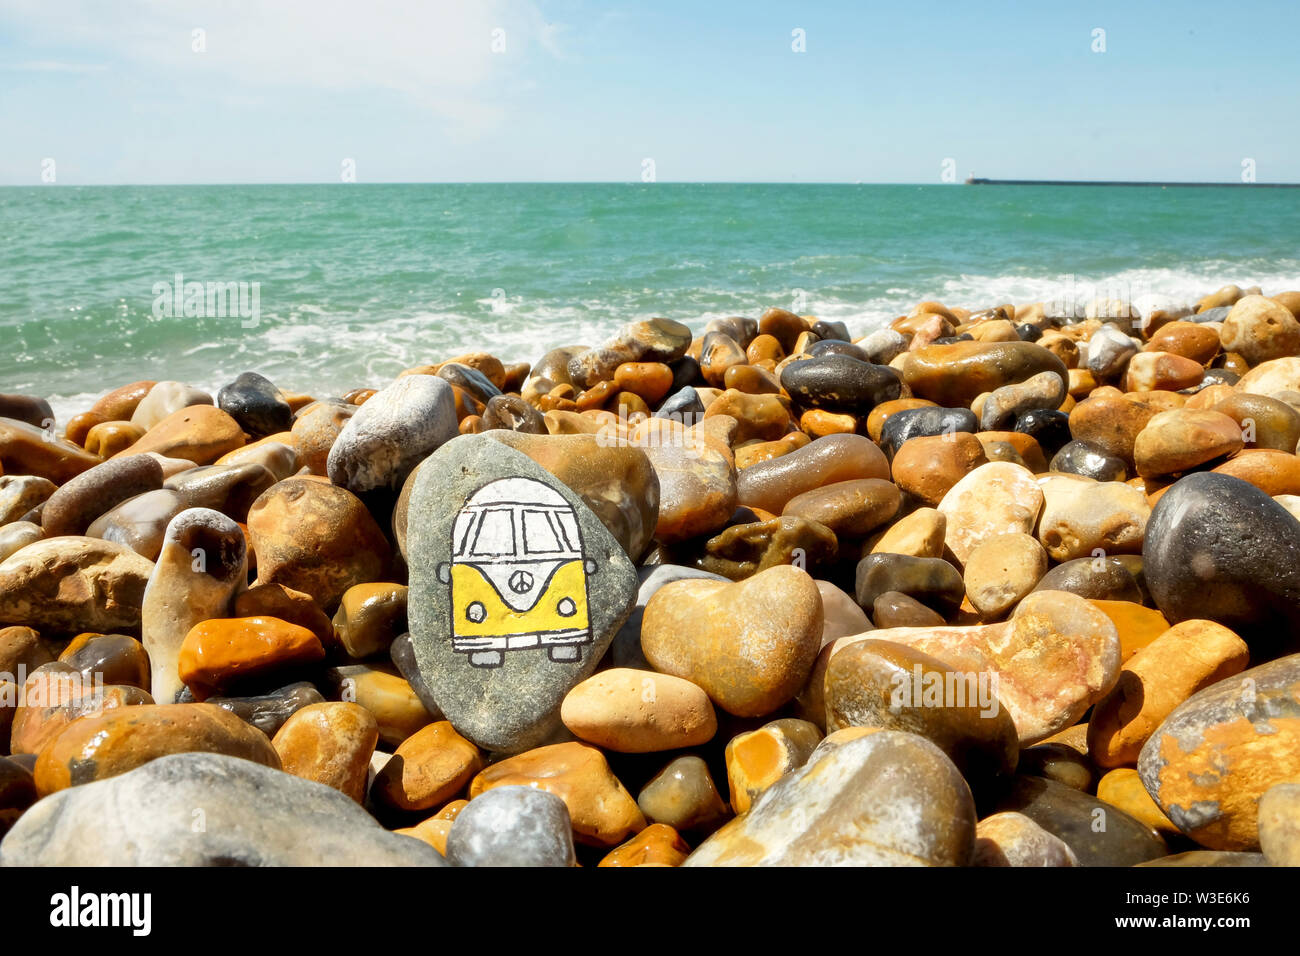 A yellow and white camper van painted onto a pebble on a pebble, beyond the pebbles is the blue sea and blue sky Stock Photo